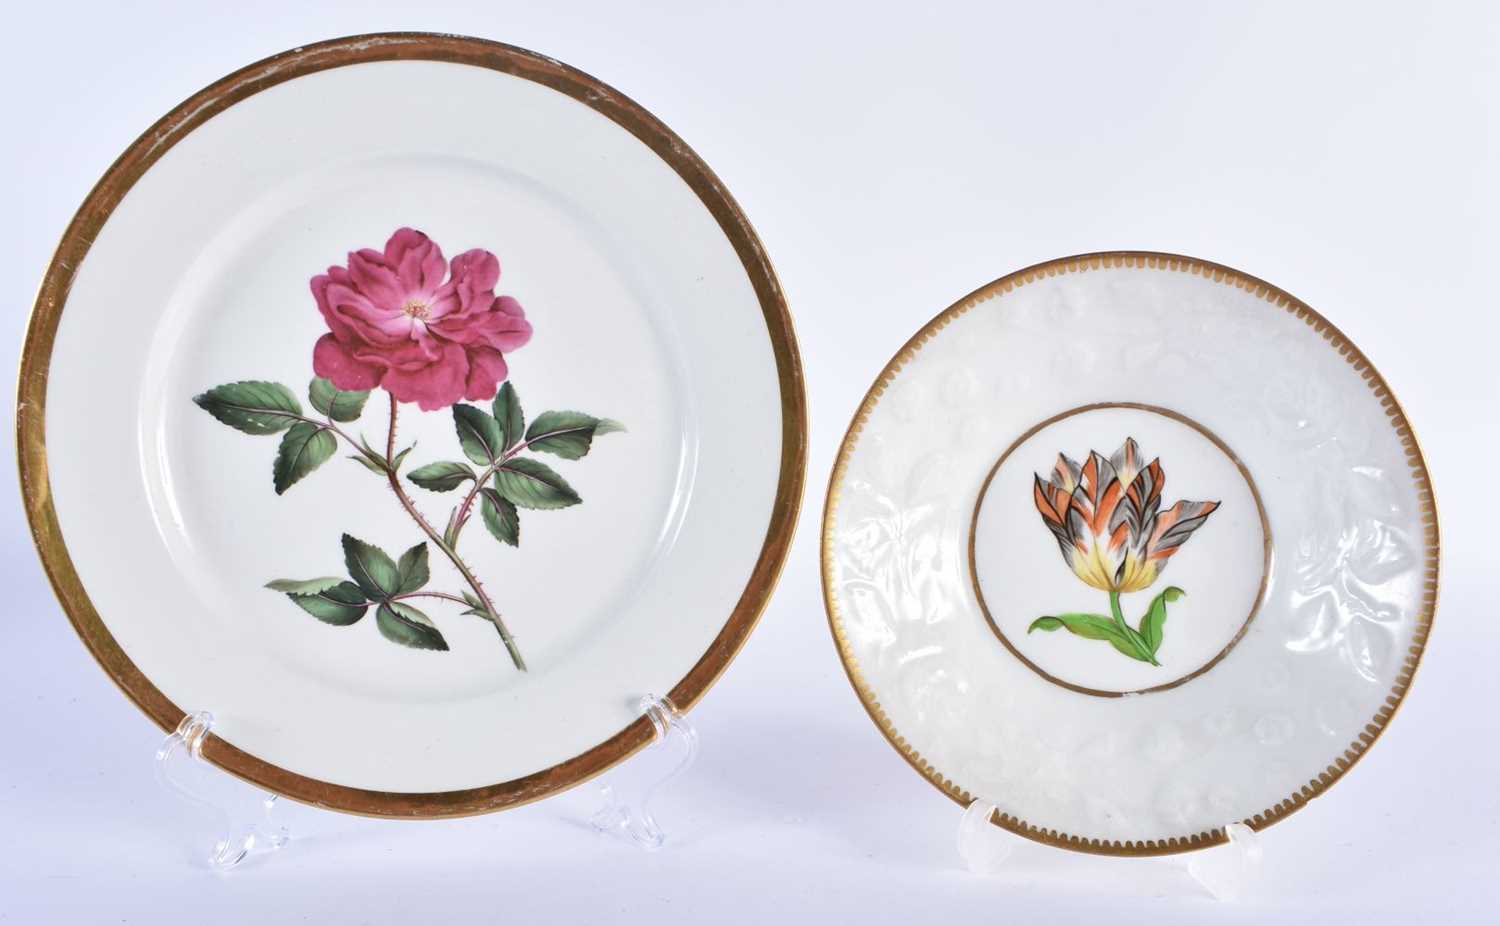 AN EARLY 19TH CENTURY CHAMBERLAINS WORCESTER BOTANICAL PORCELAIN PLATE together with a similar